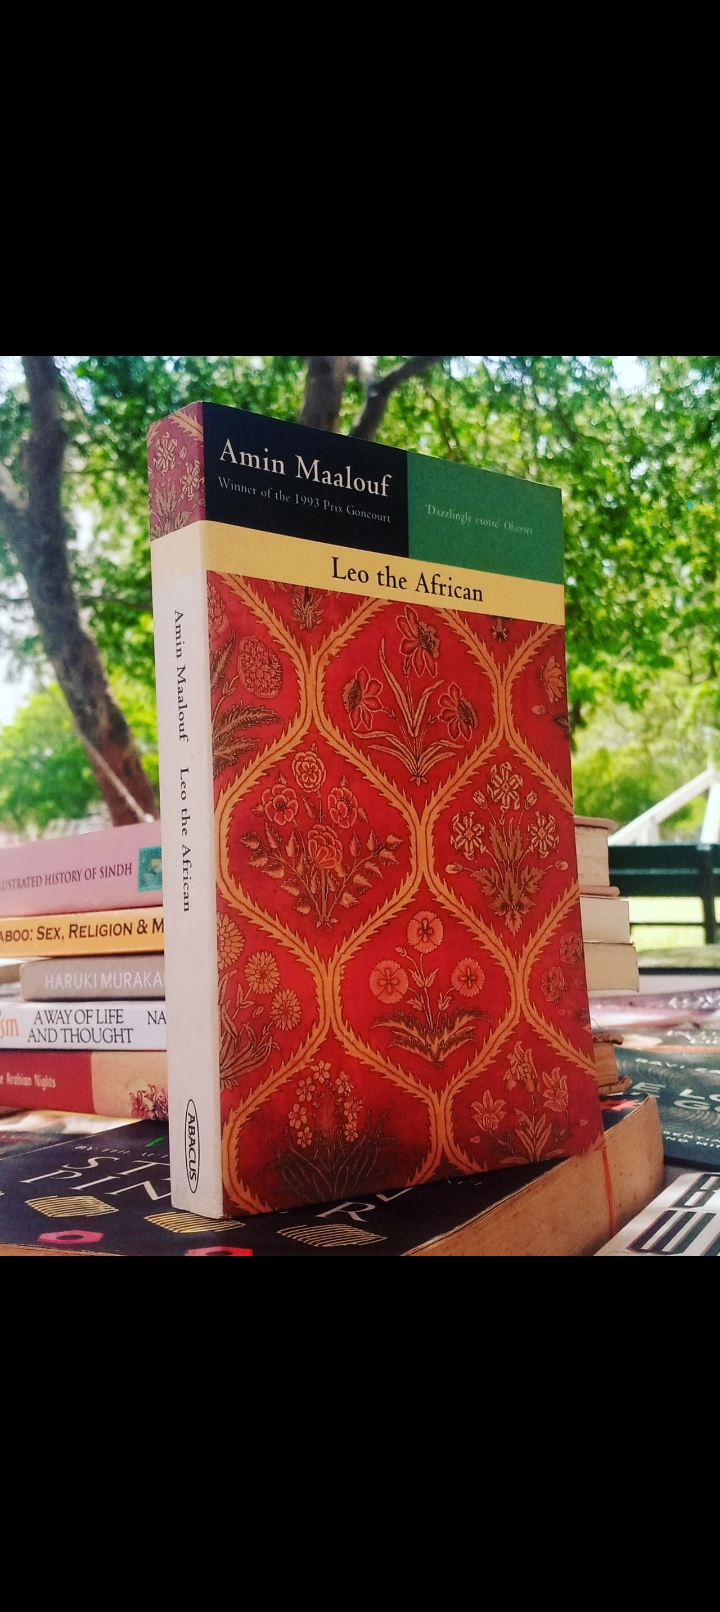 leo the african by amin maalouf. original paperback